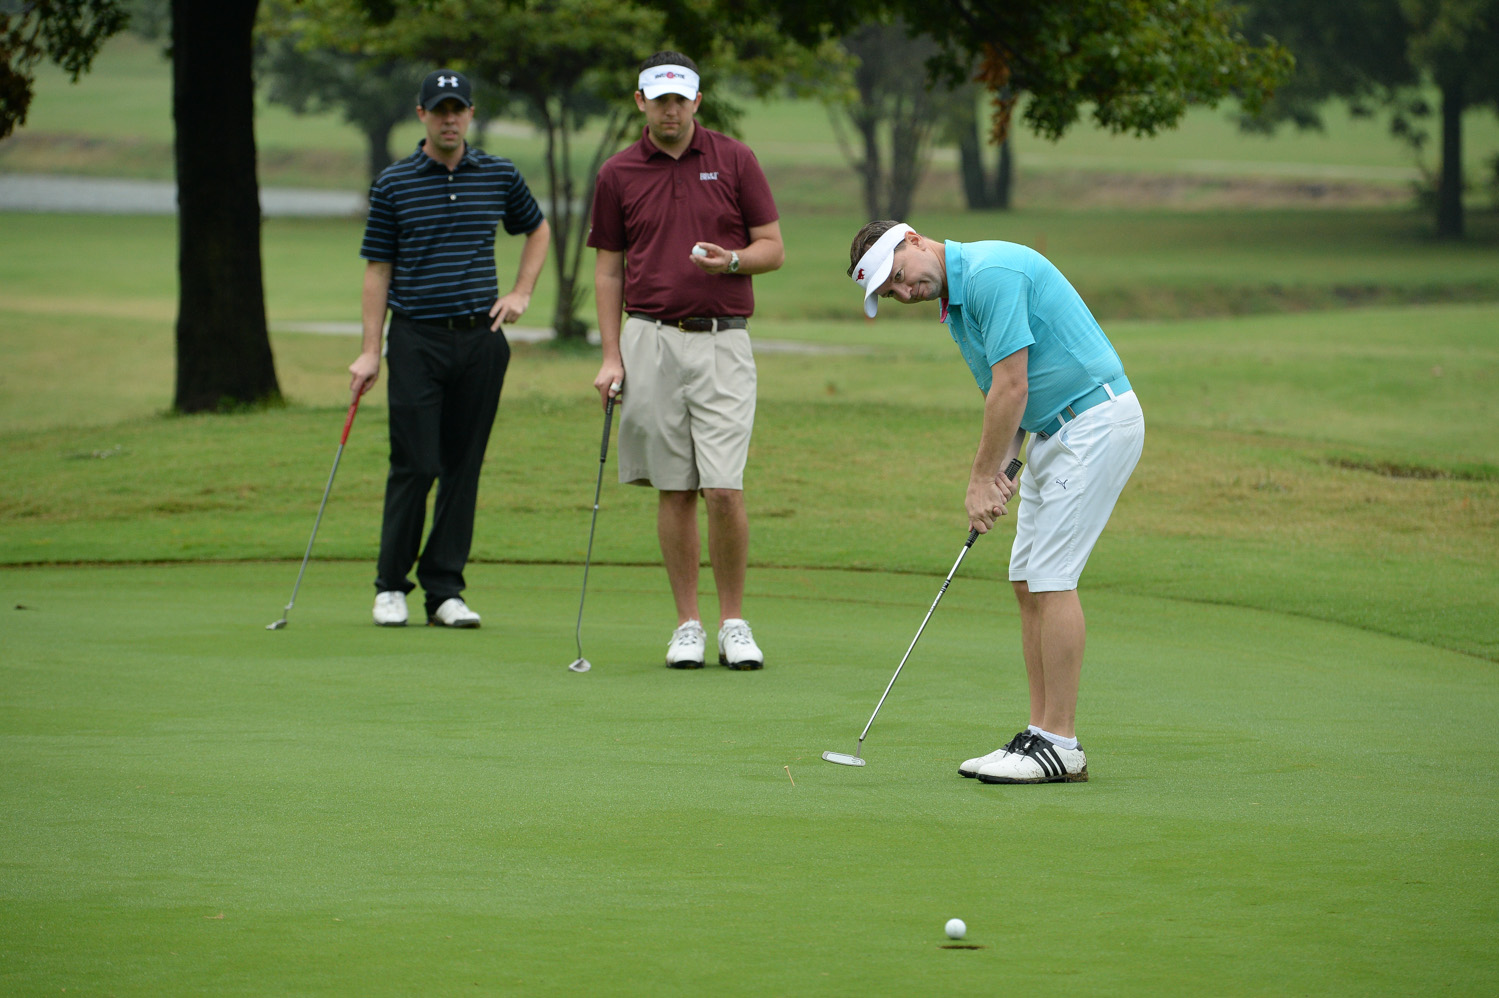 Nearly 180 golfers braved a persistent rain to participate.